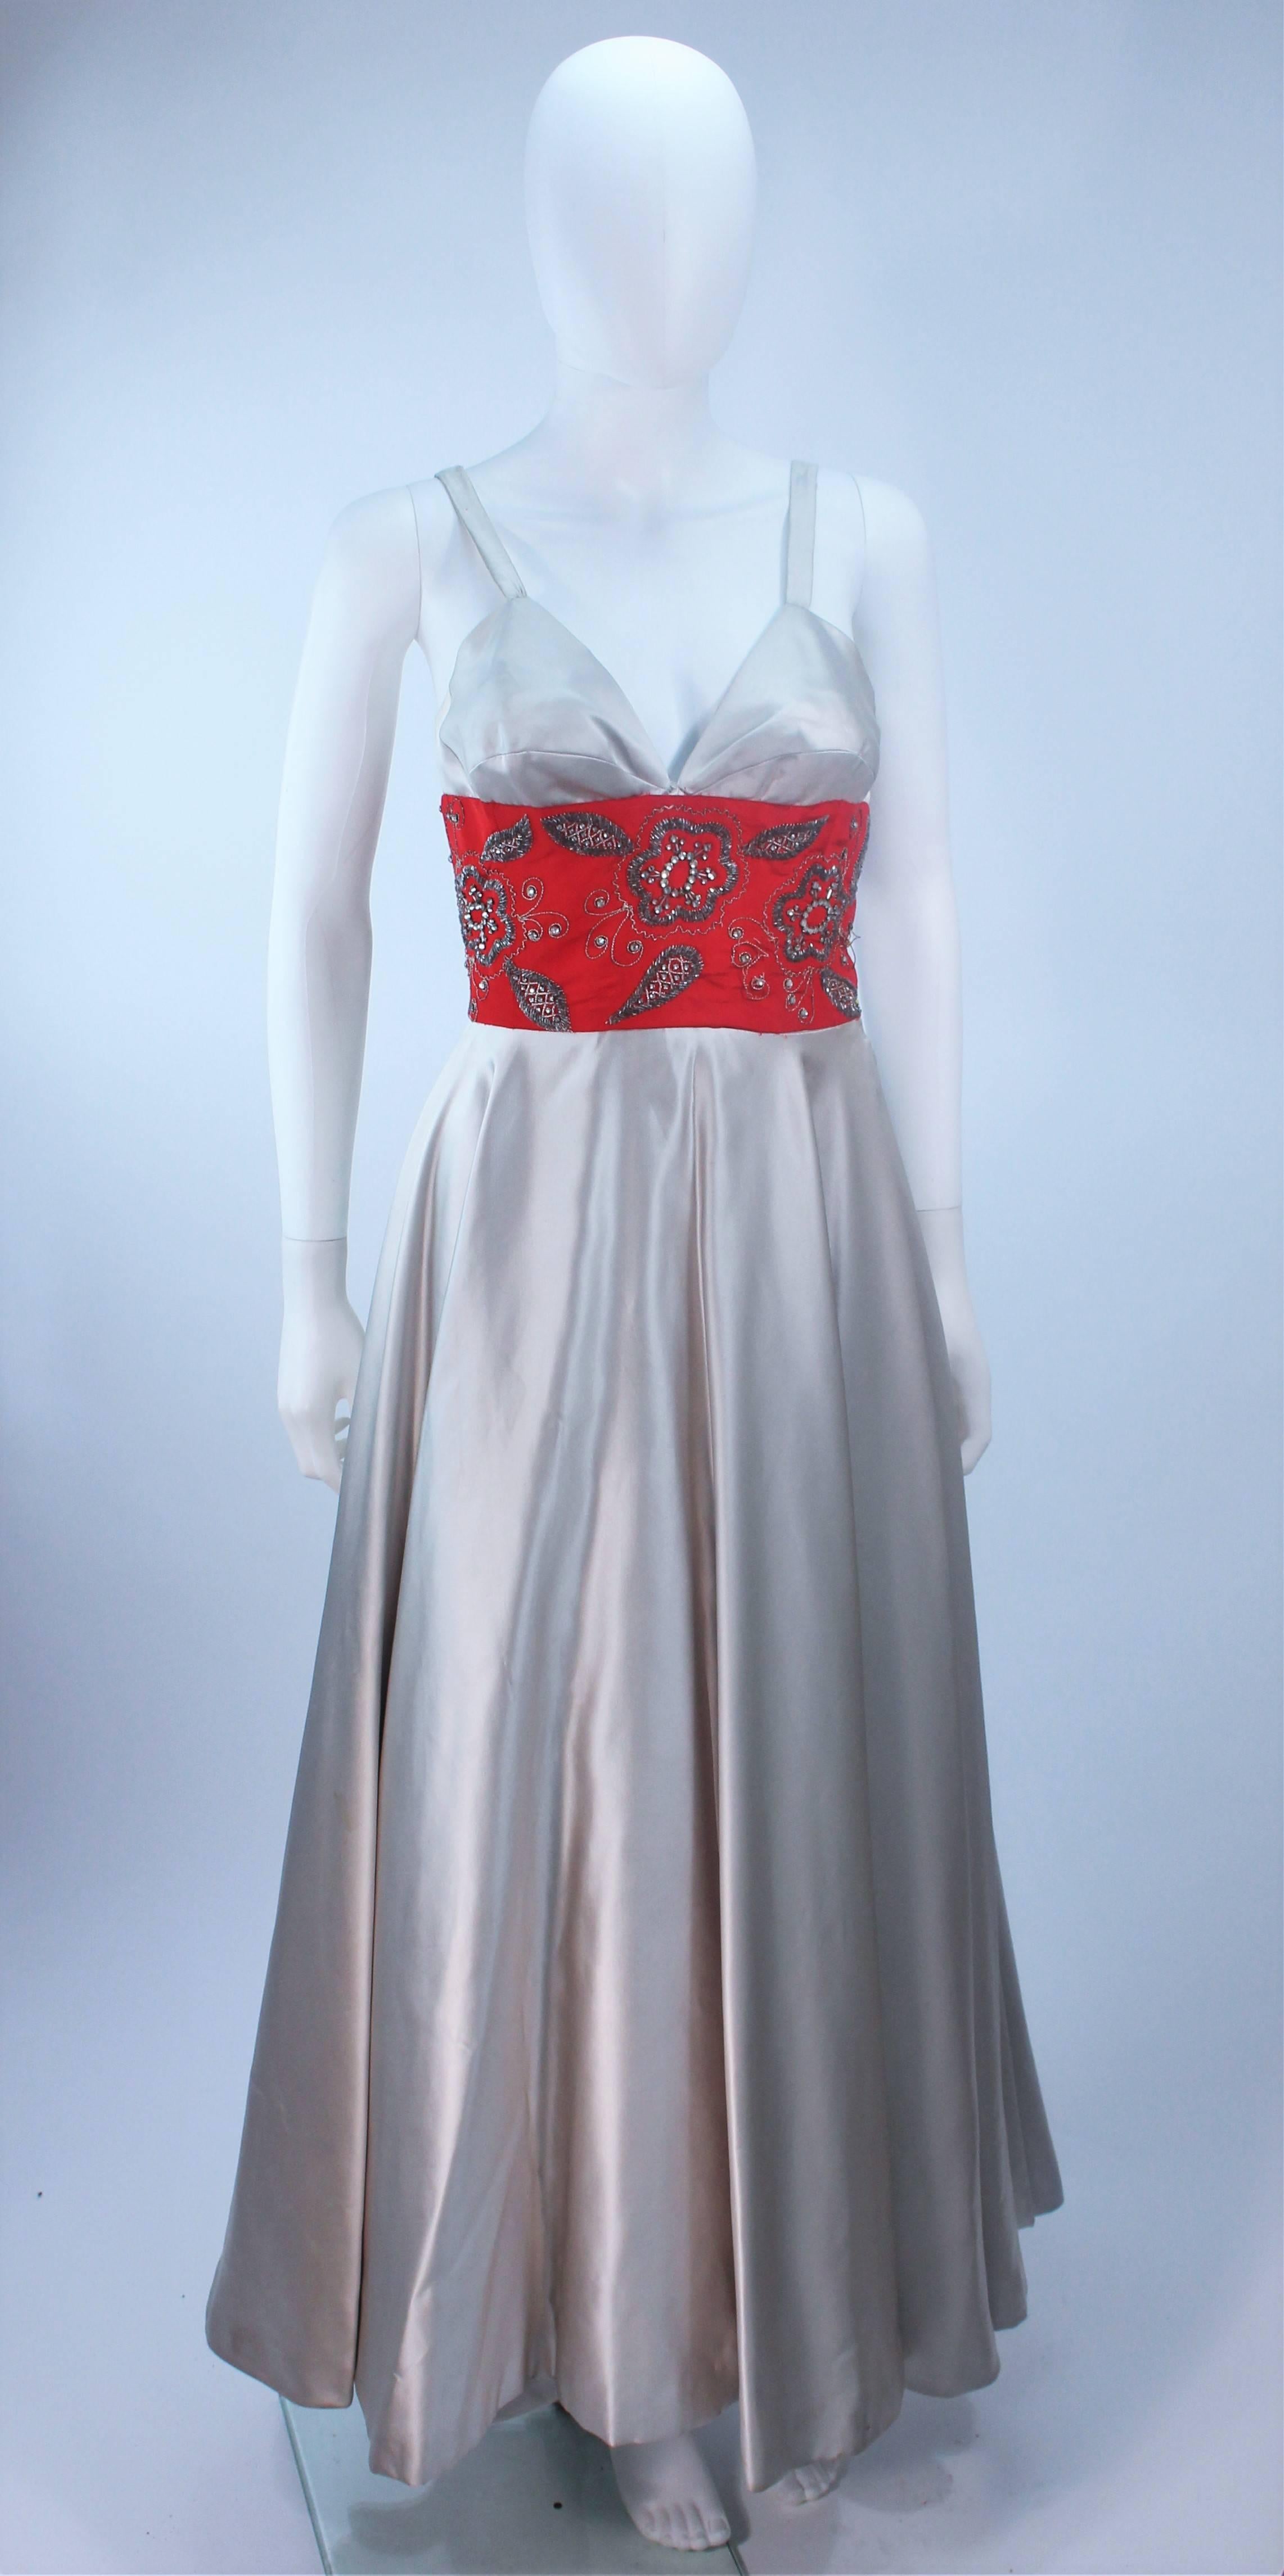 This Eleanora Garnett  gown is composed of a silver silk with a red embellished waist. Features a darted style bust. There is a side zipper closure. In excellent vintage condition. (Shot with crinoline and tissue in the bust).

  **Please